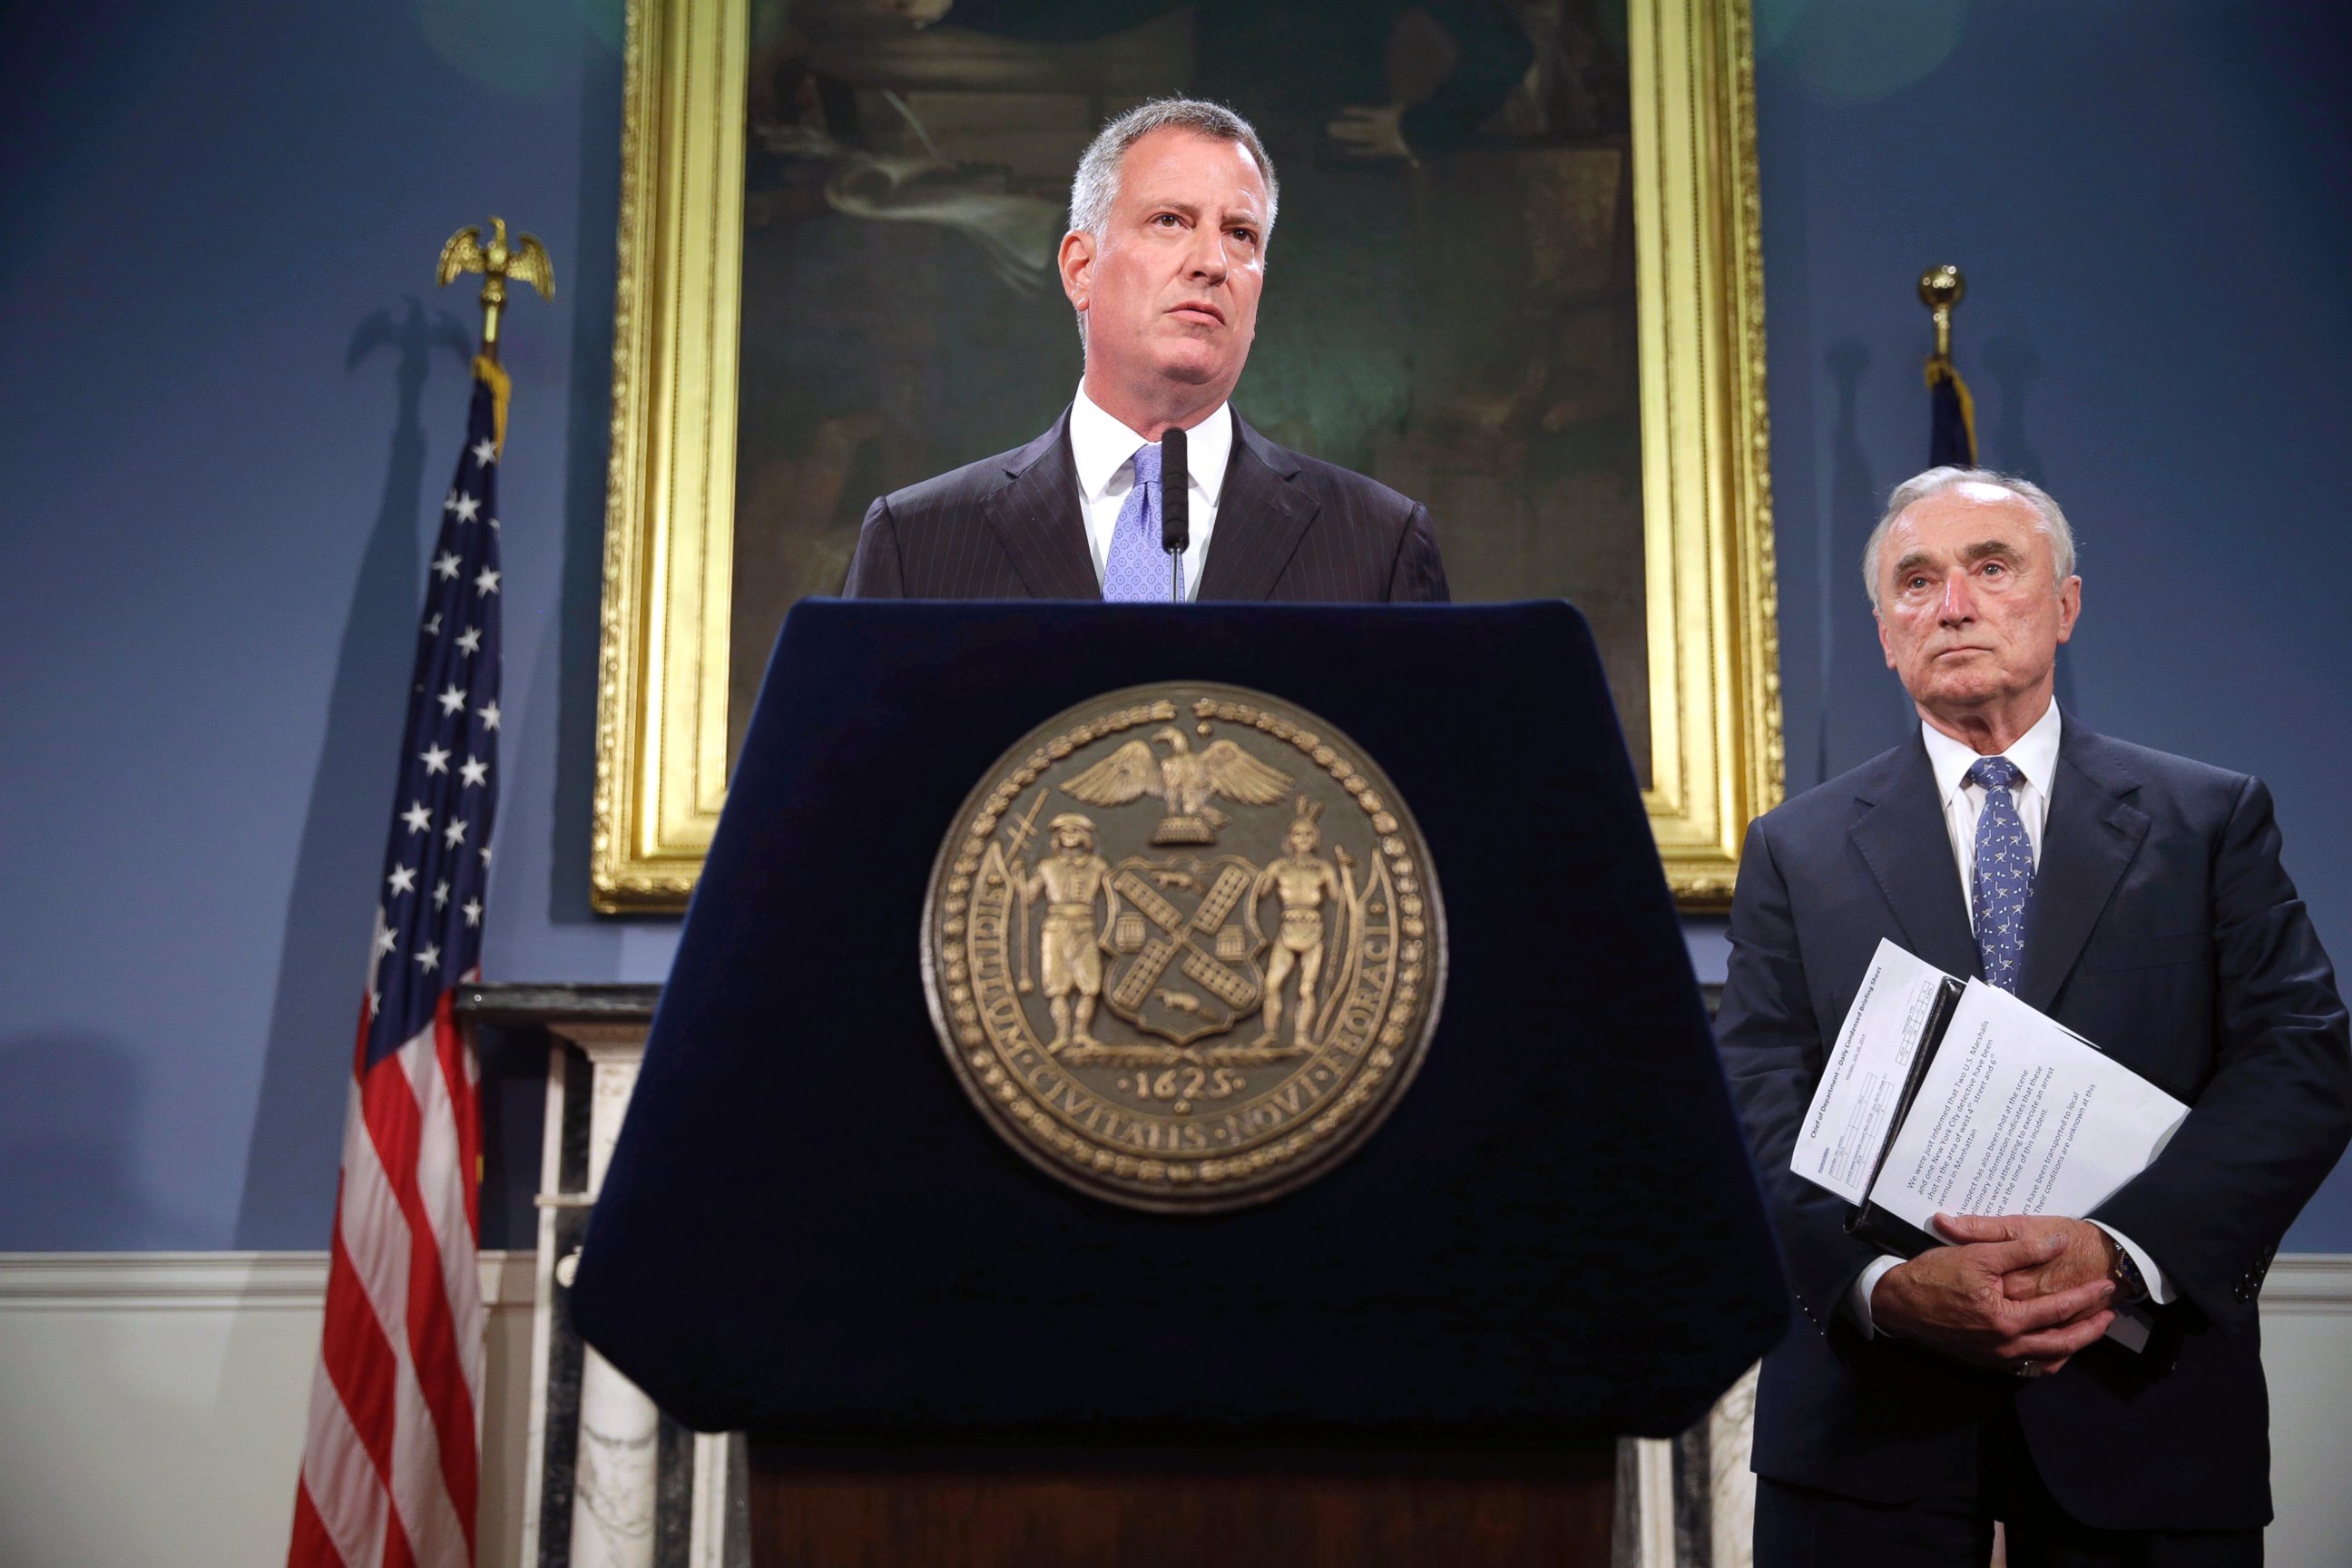 PHOTO: New York City mayor Bill de Blasio, center, and police commissioner Bill Bratton speak to reporters during a news conference in New York in this July 28, 2014 file photo.